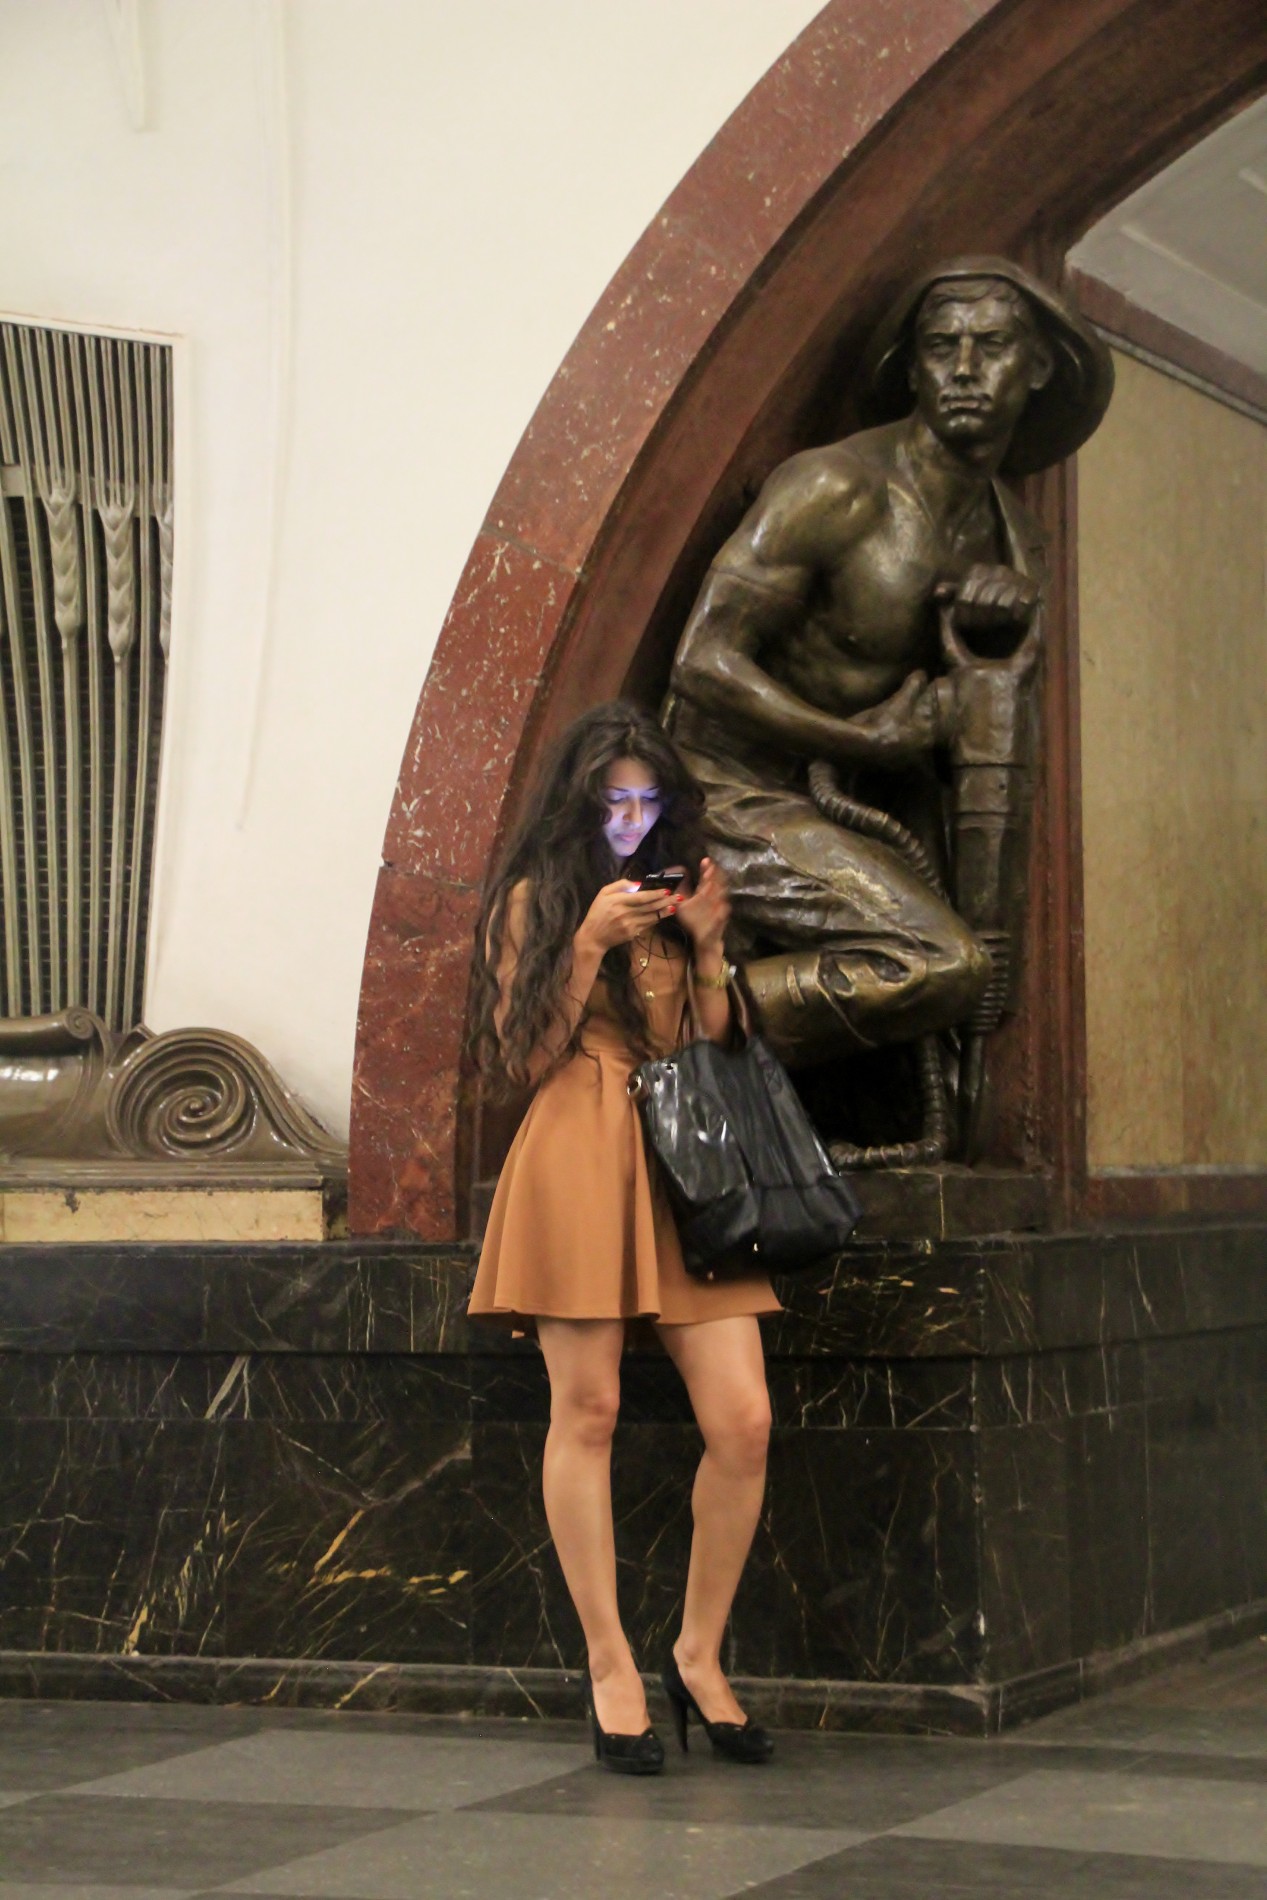 A Russian woman sends a text under a bronze statue of a miner at the Ploshchad Revolyutsii Moscow Metro station.